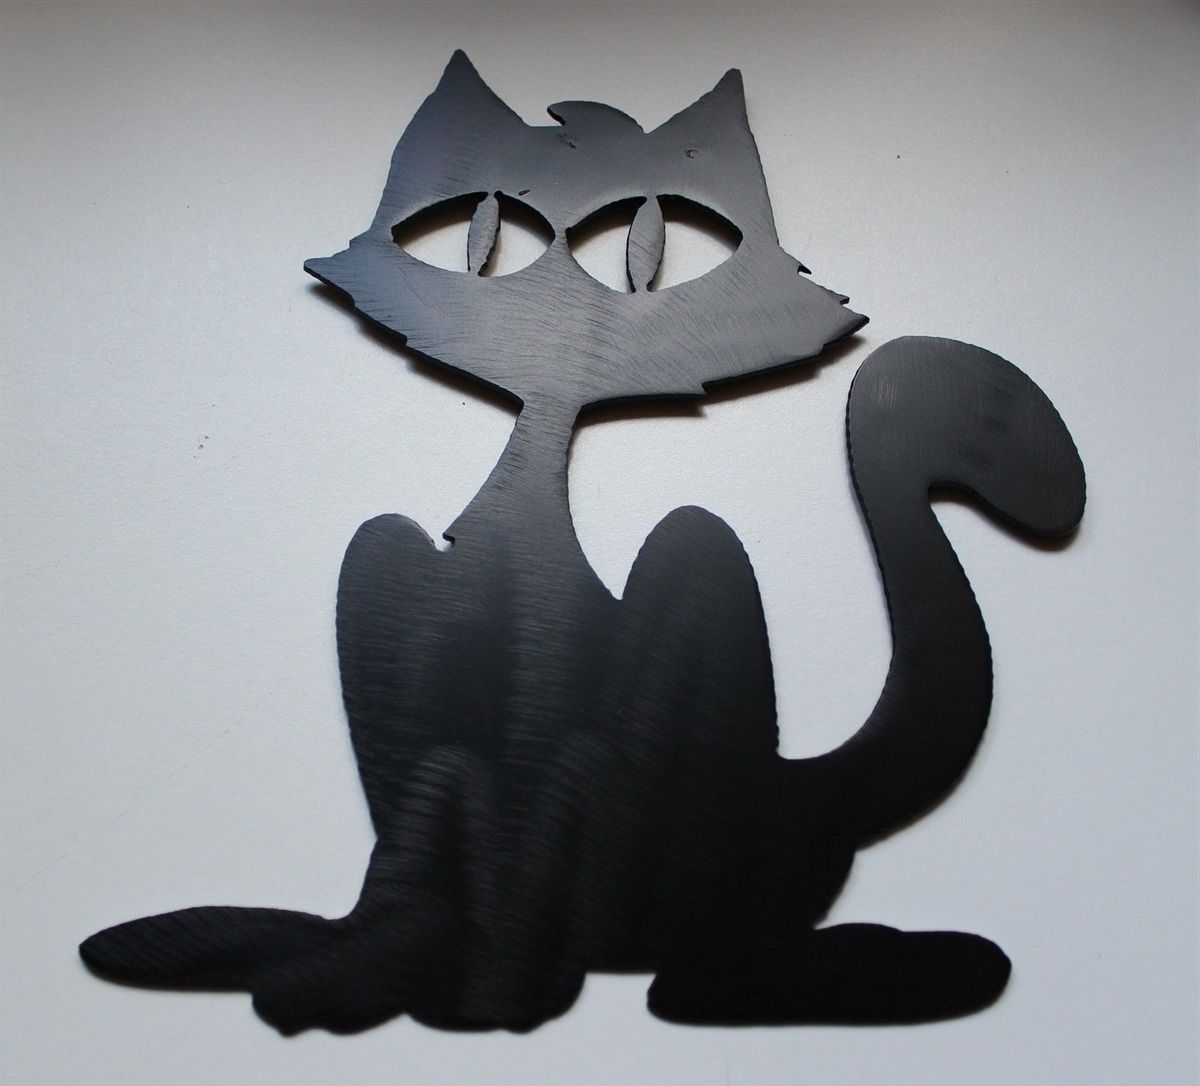 Halloween Black Cat Metal Wall Art Intended For Most Current Black Metal Wall Art (View 11 of 20)